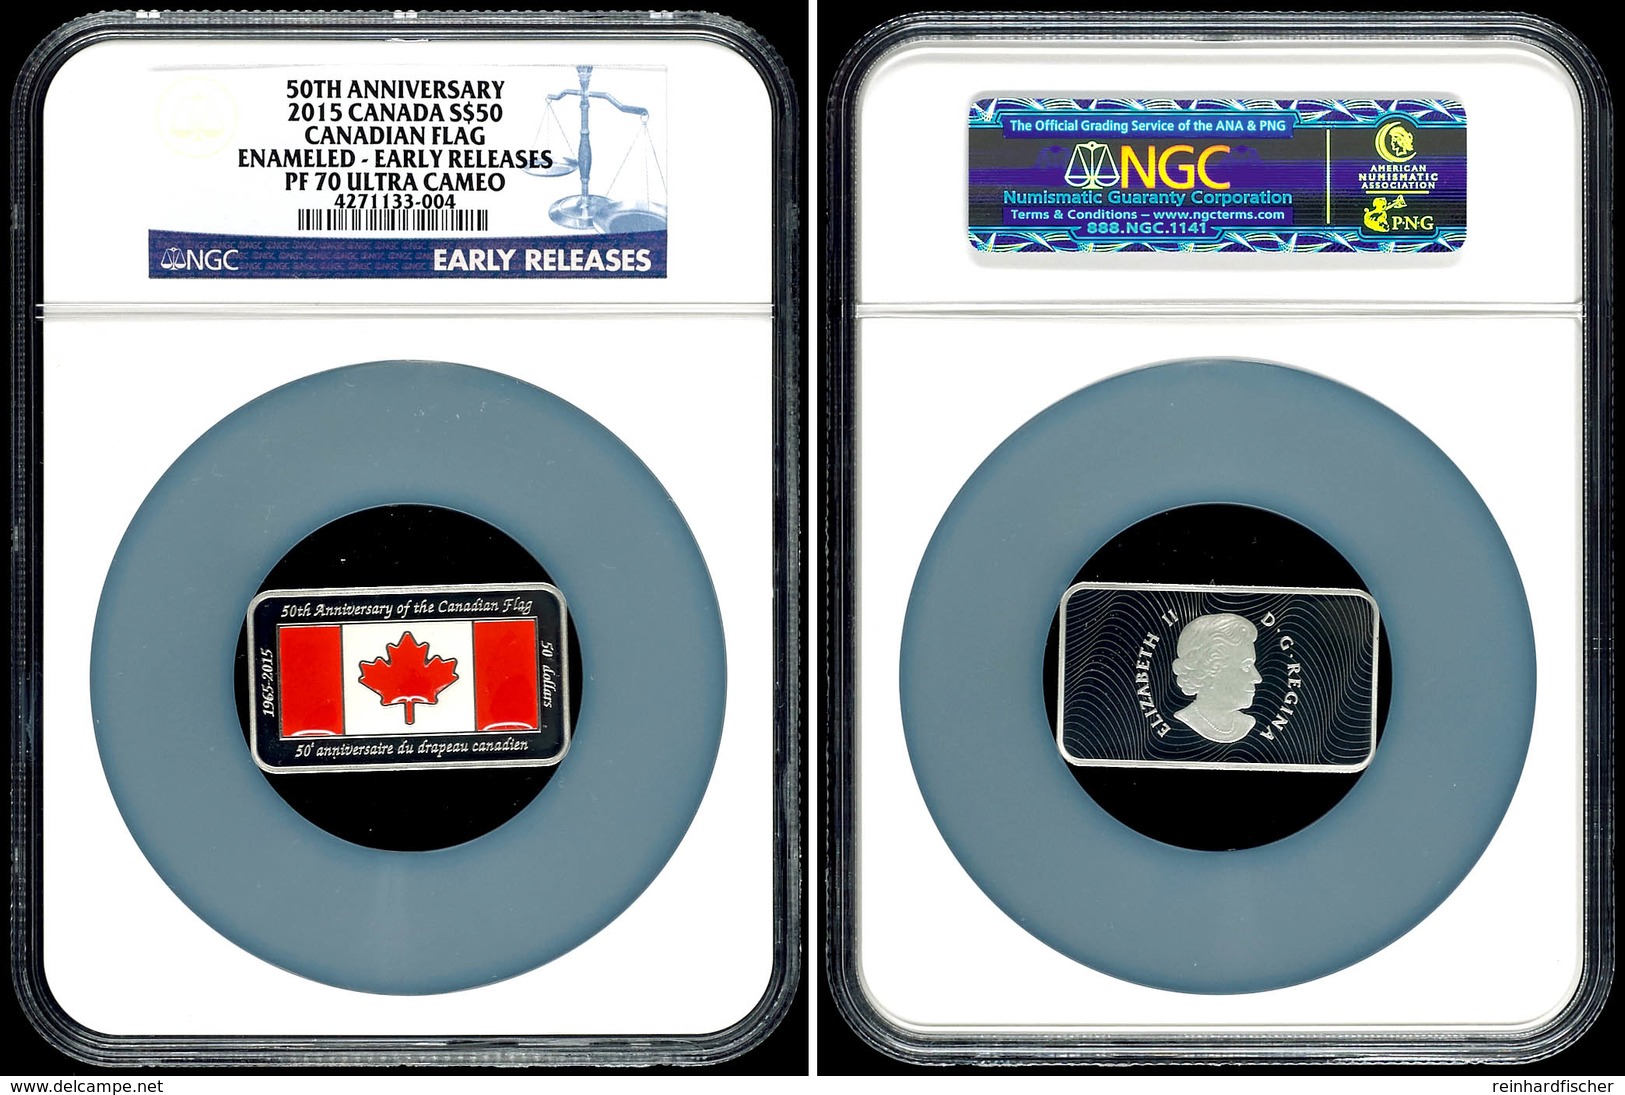 50 Dollars, 2015, Canadian Flag, In Slab Der NGC Mit Der Bewertung PF70 Ultra Cameo, Enamelled Early Releases. - Canada